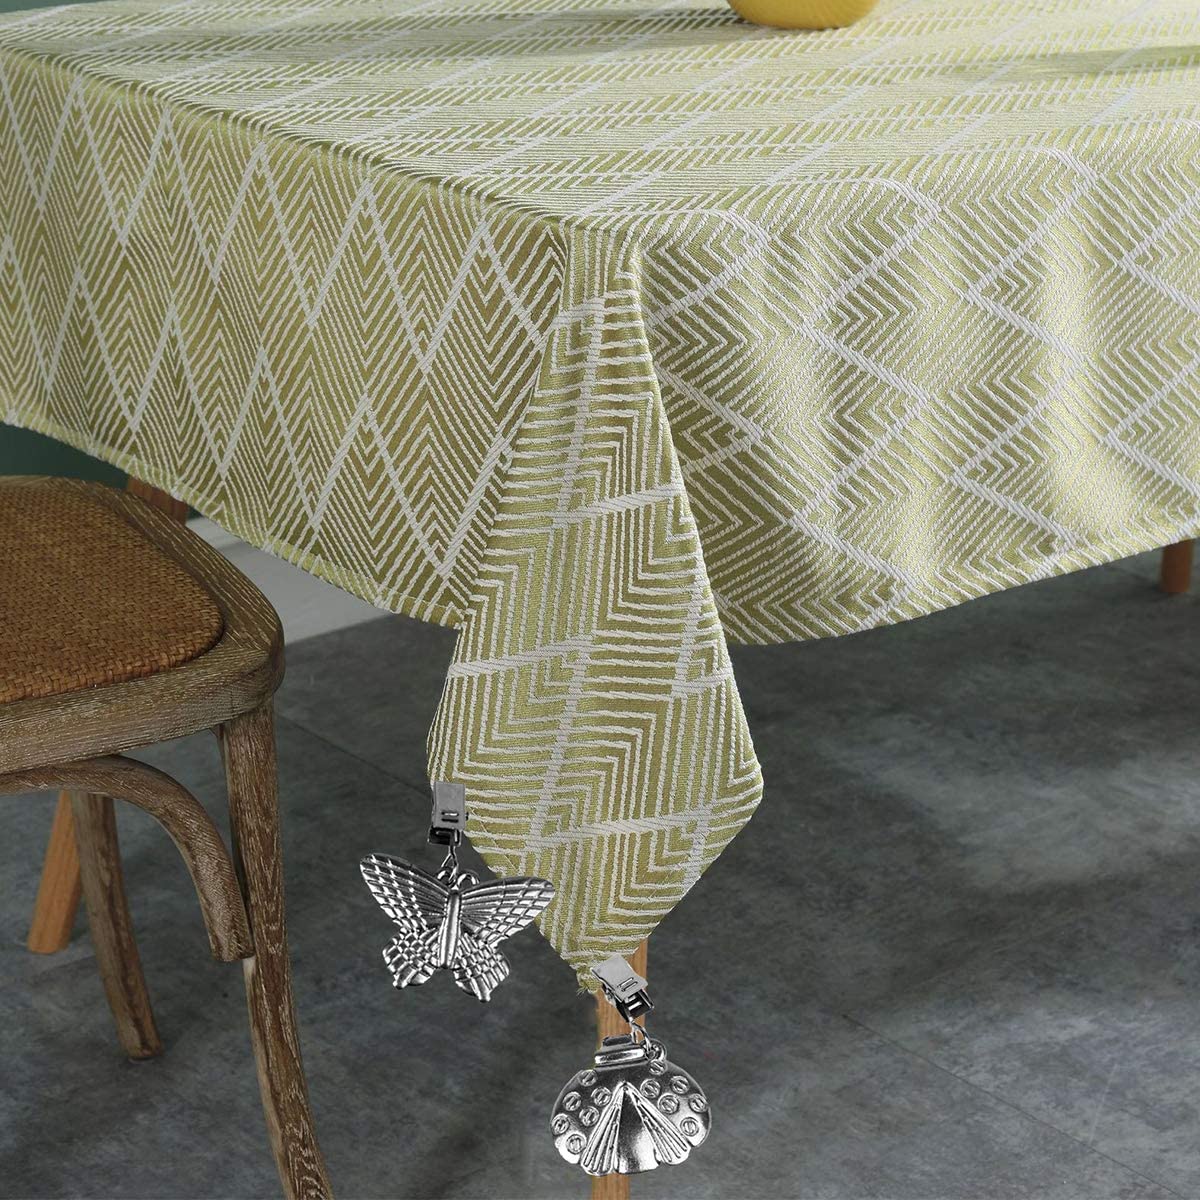 Tablecloth Clips & Weights Mixed Fruit